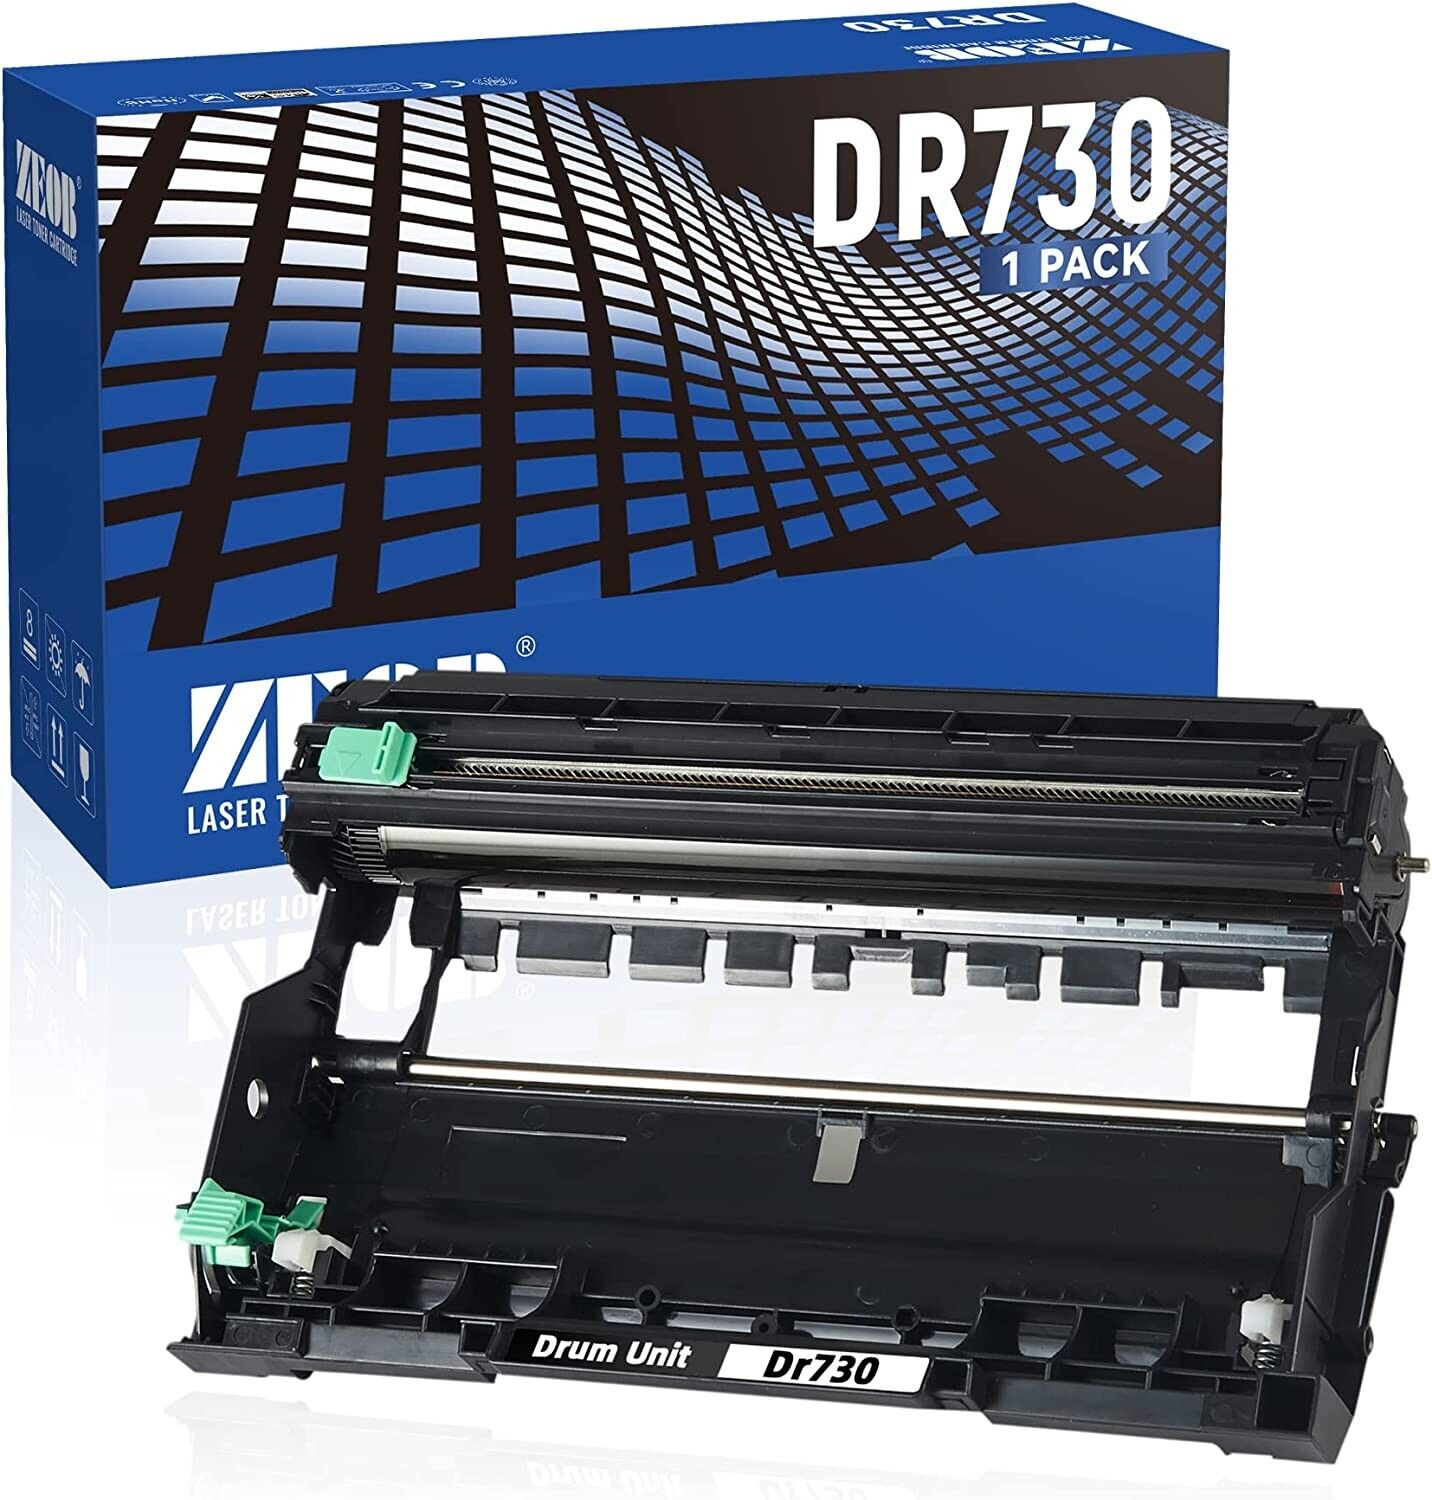 Replacement Compatible for Printer Brother DR730 Drum Cartridge New